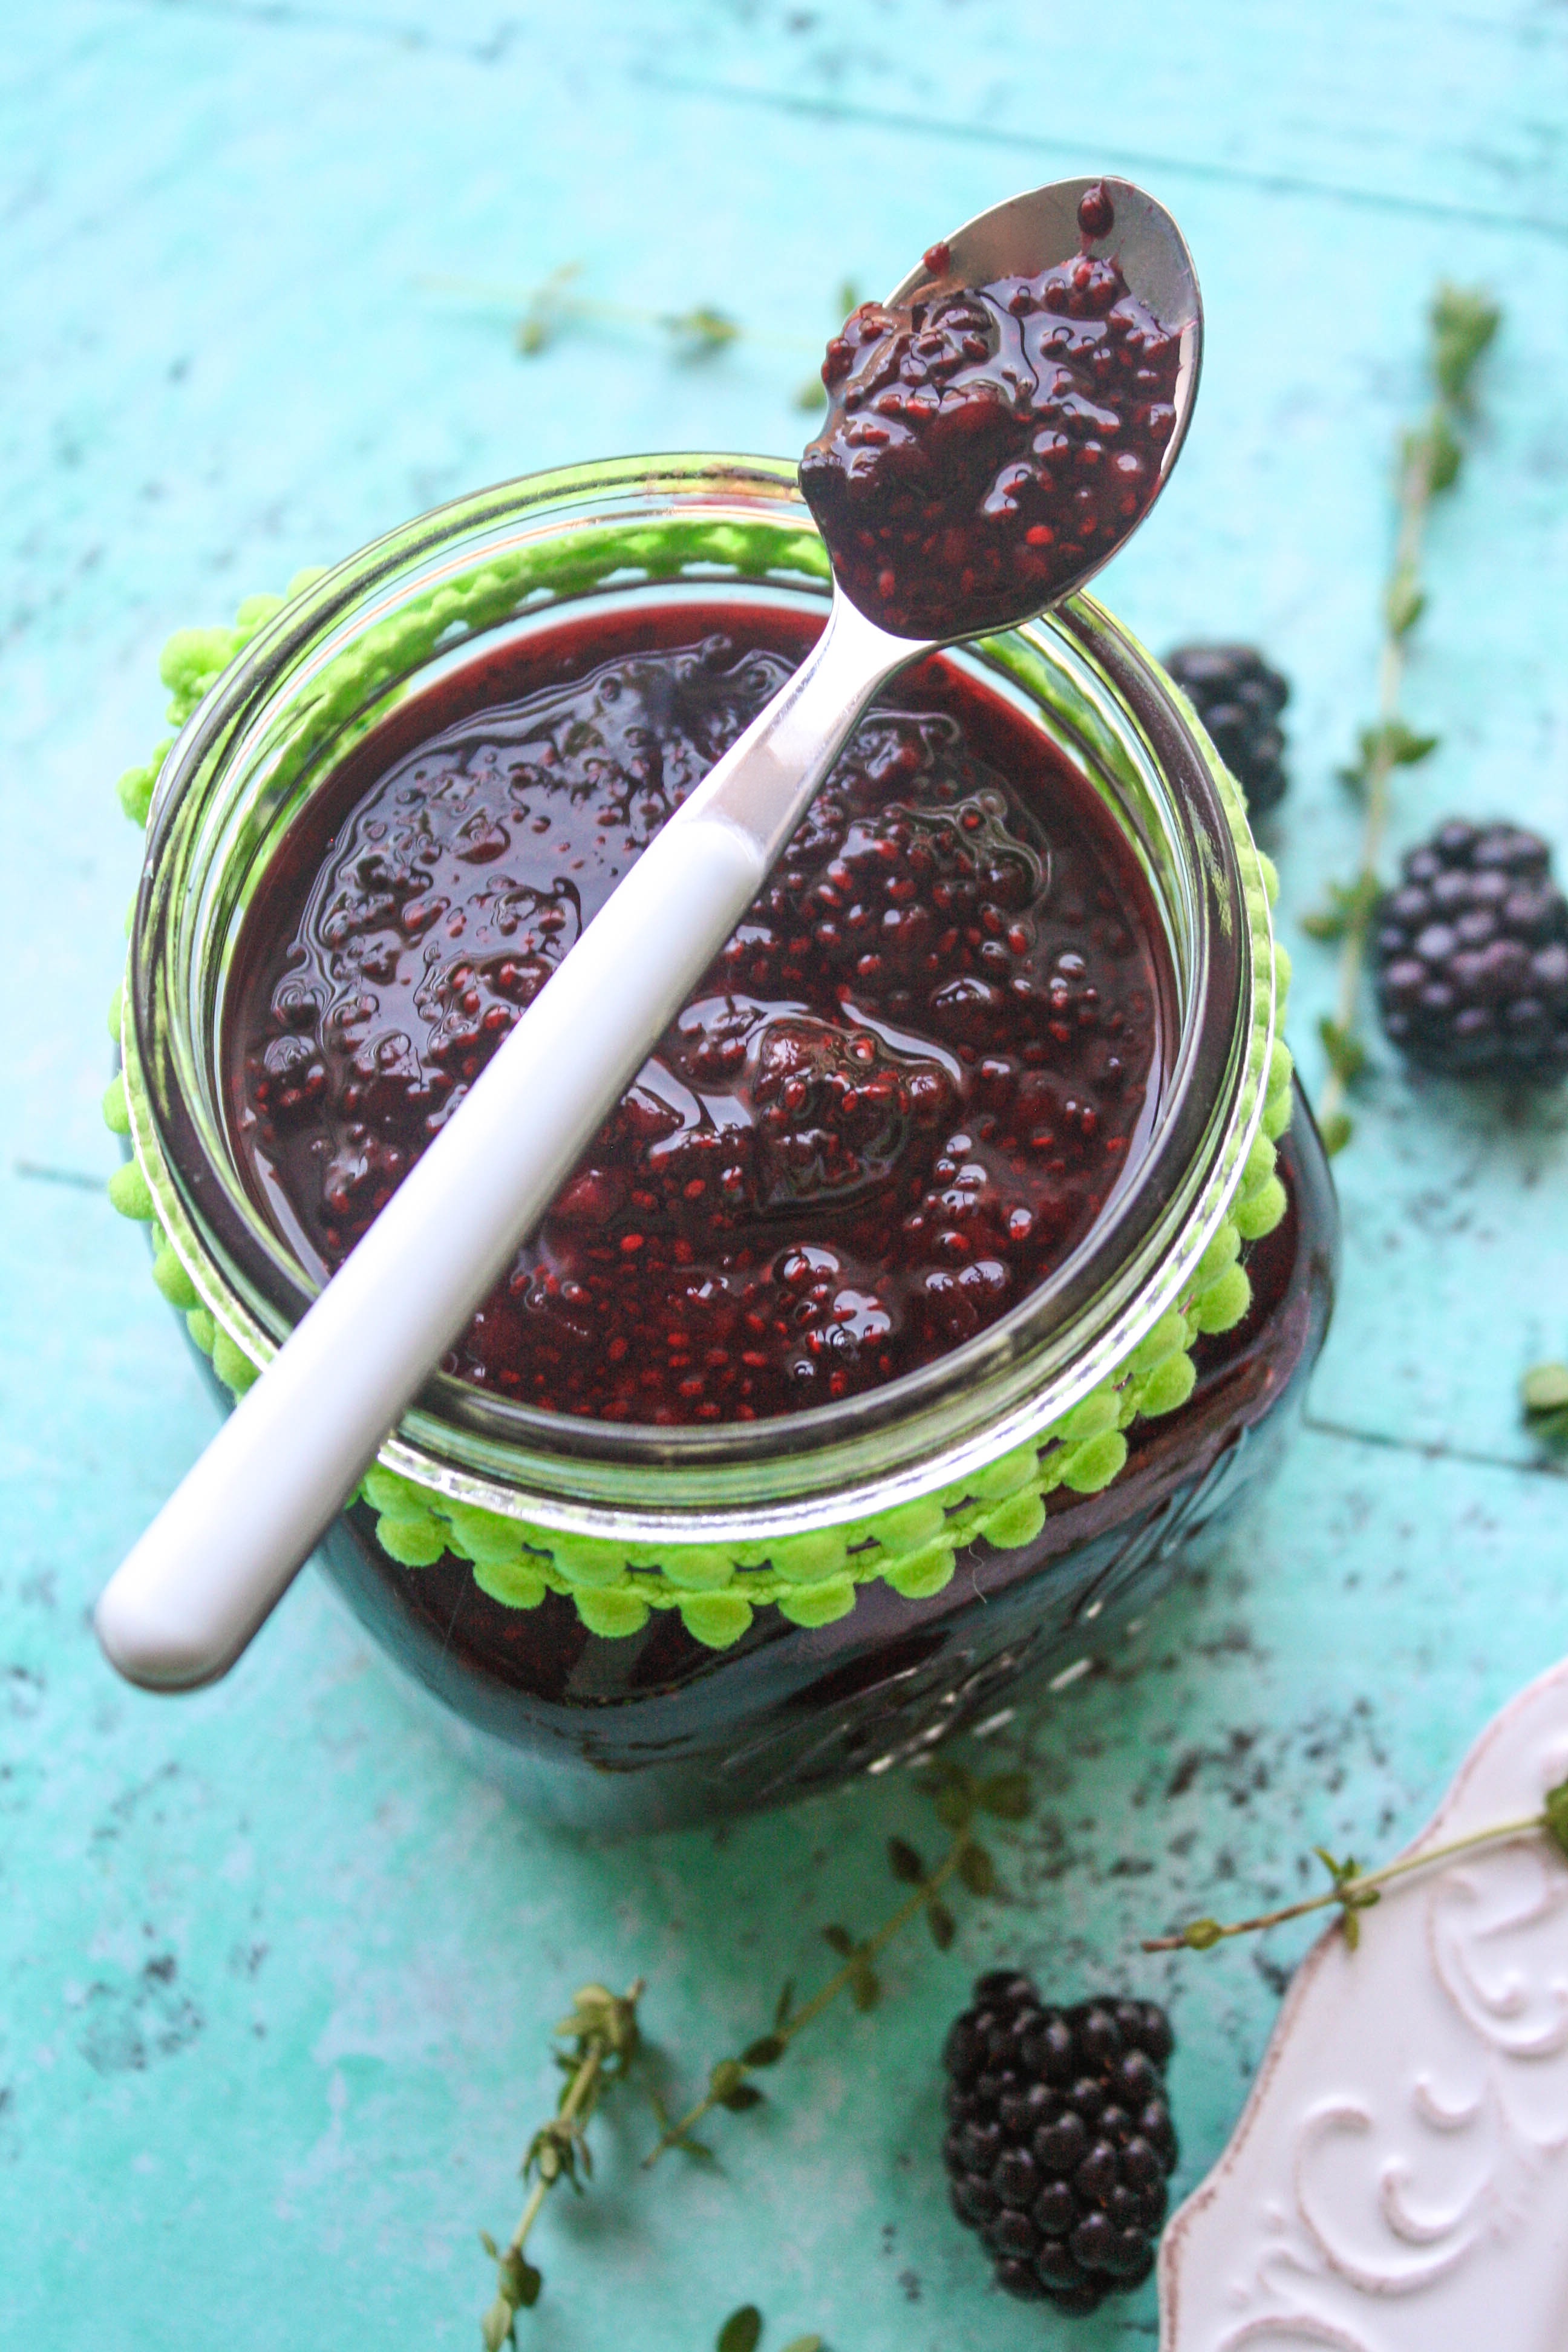 Blackberry-thyme chia seed jam is what you want on your toast! Blackberry-thyme chia seed jam is so easy to make for a treat with your toast!